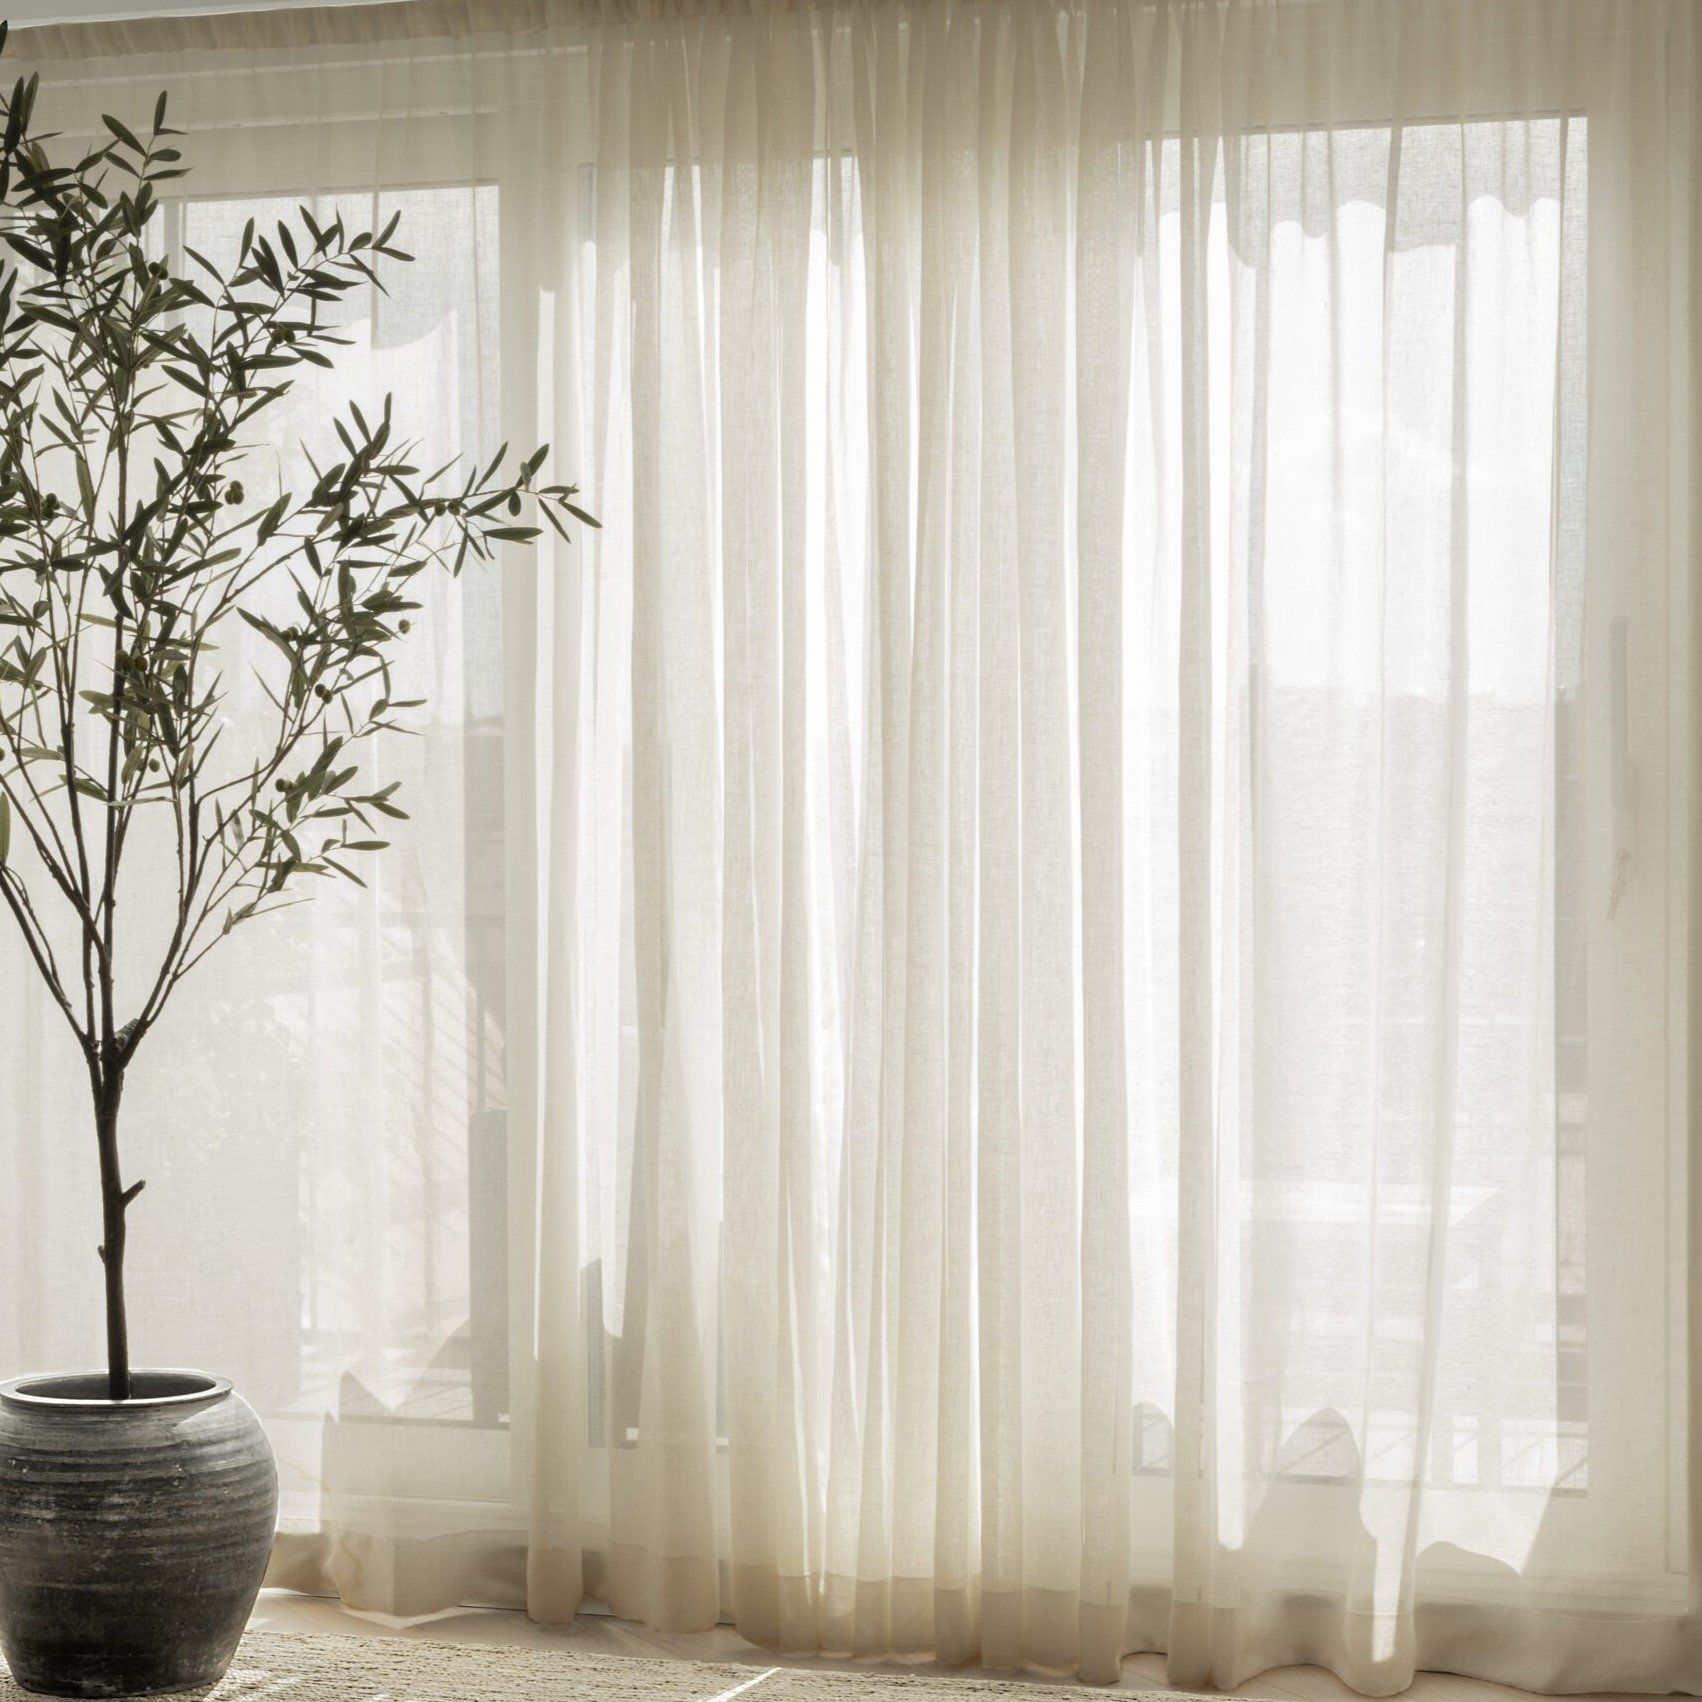 Add a Touch of Elegance with Sheer Curtains for Every Space